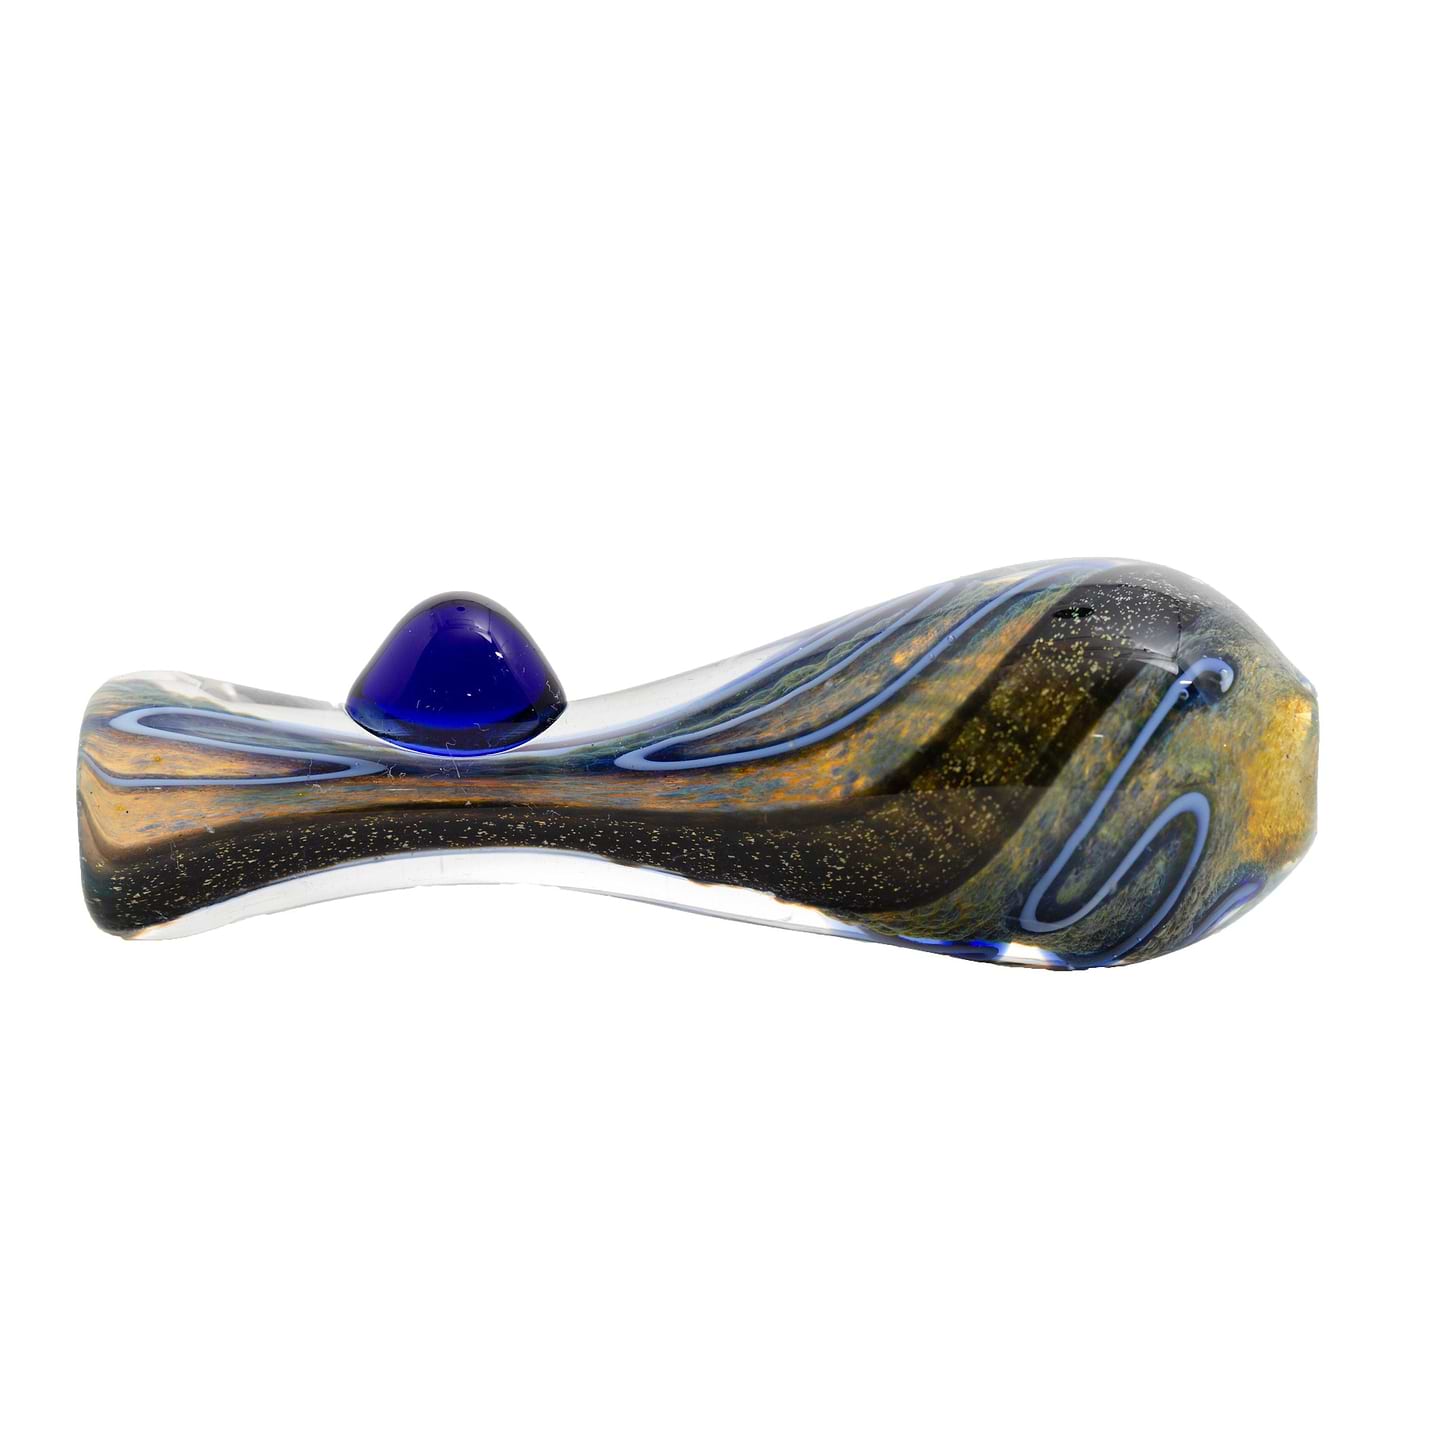 3-inch fish-shaped oney one hitter smoking device pipe vibrant swirling marine colors refreshing aquatic design